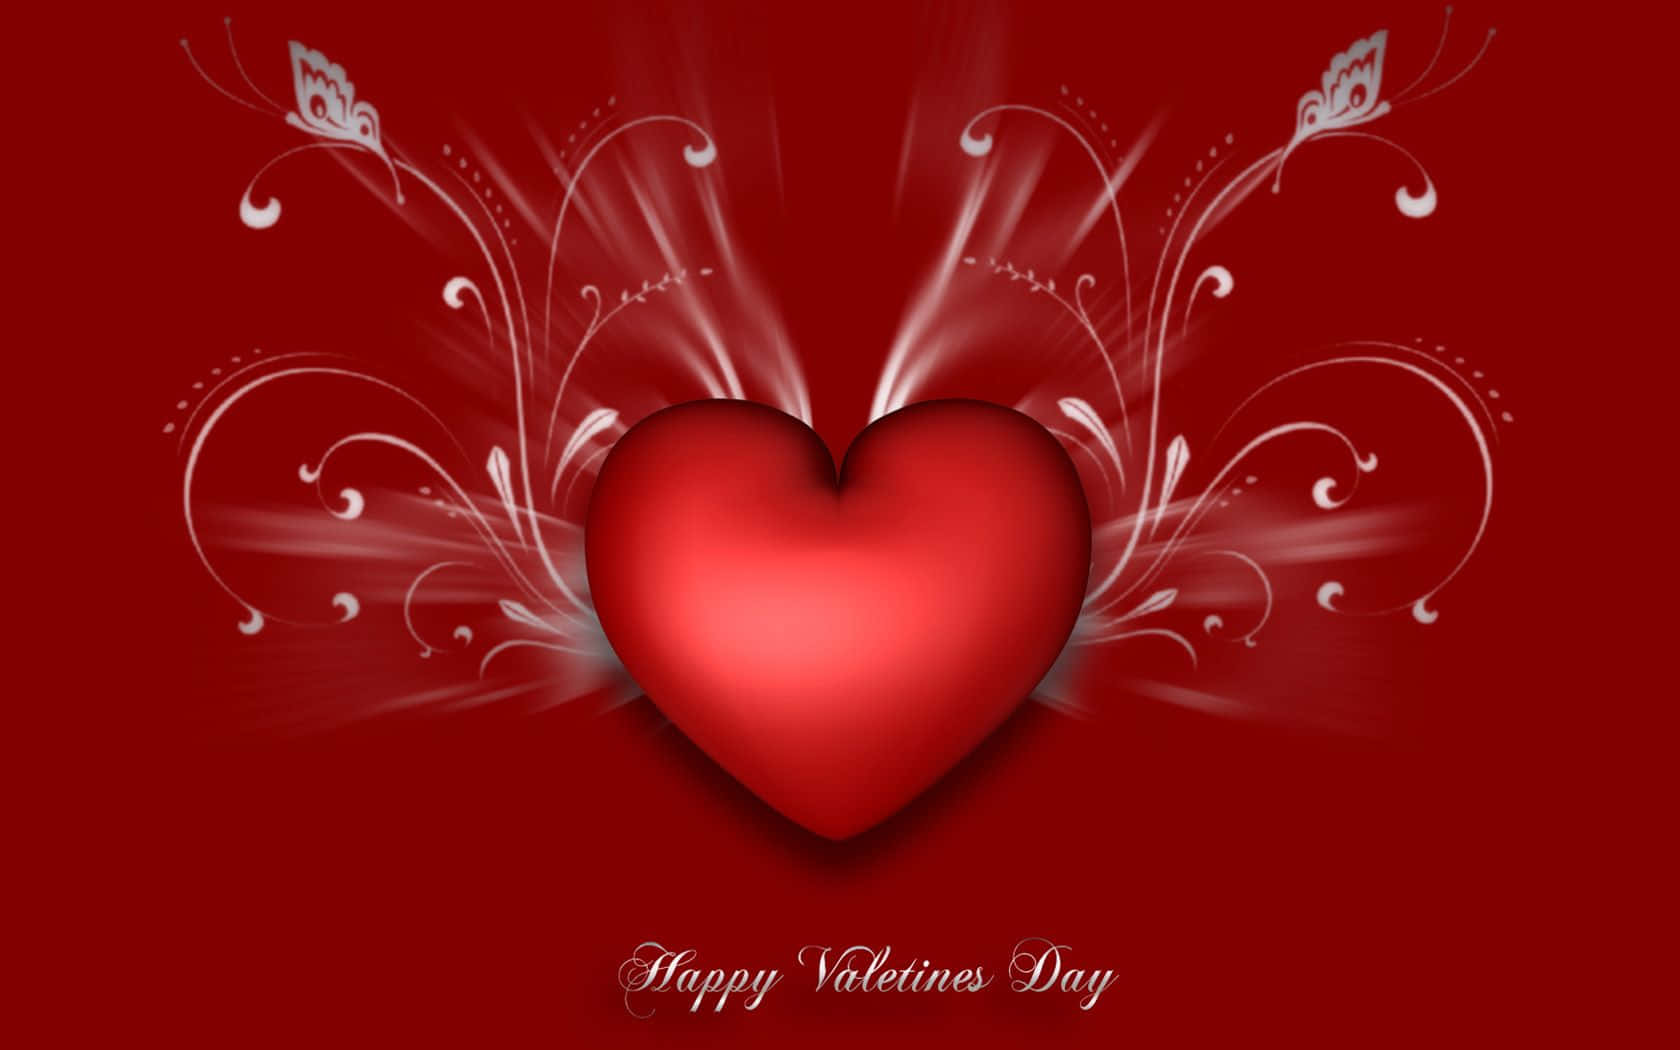 Valentine's Day Wallpapers - Valentine's Day Wallpapers Background